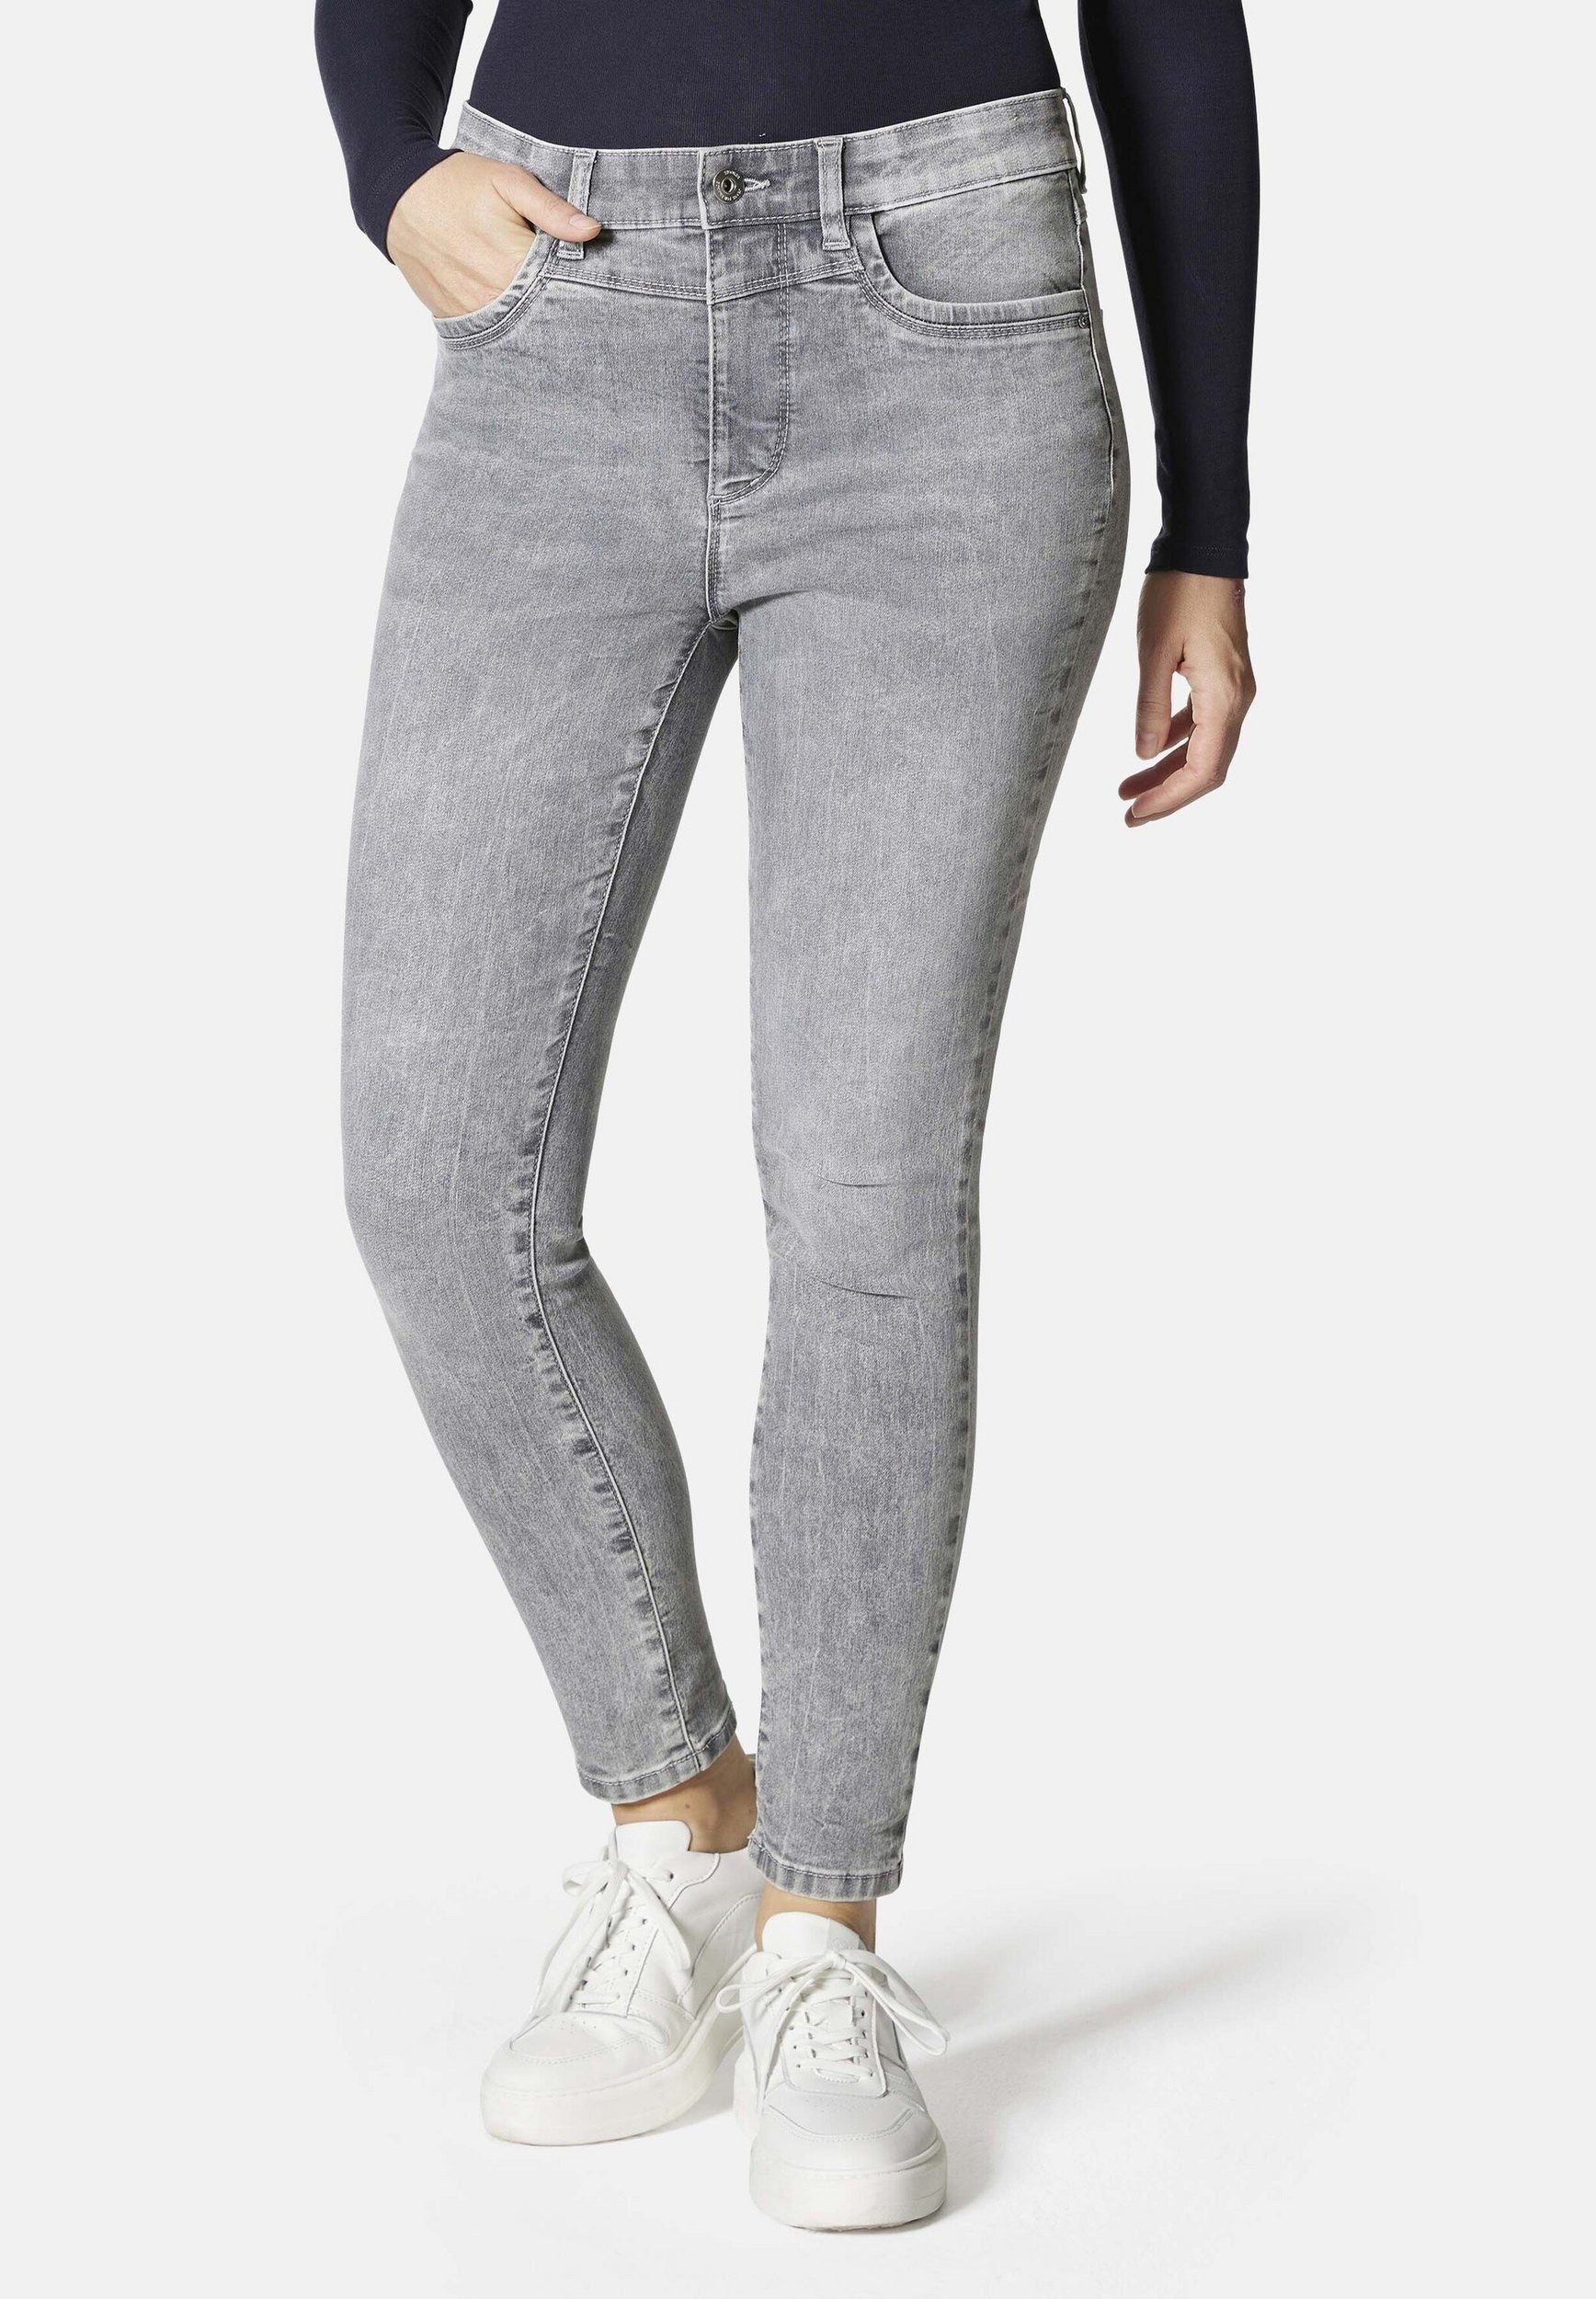 STOOKER WOMEN Skinny-fit-Jeans RIO STRETCH JEANS - FEXXI MOVE STRASS SKINNY FIT - Grey bleached